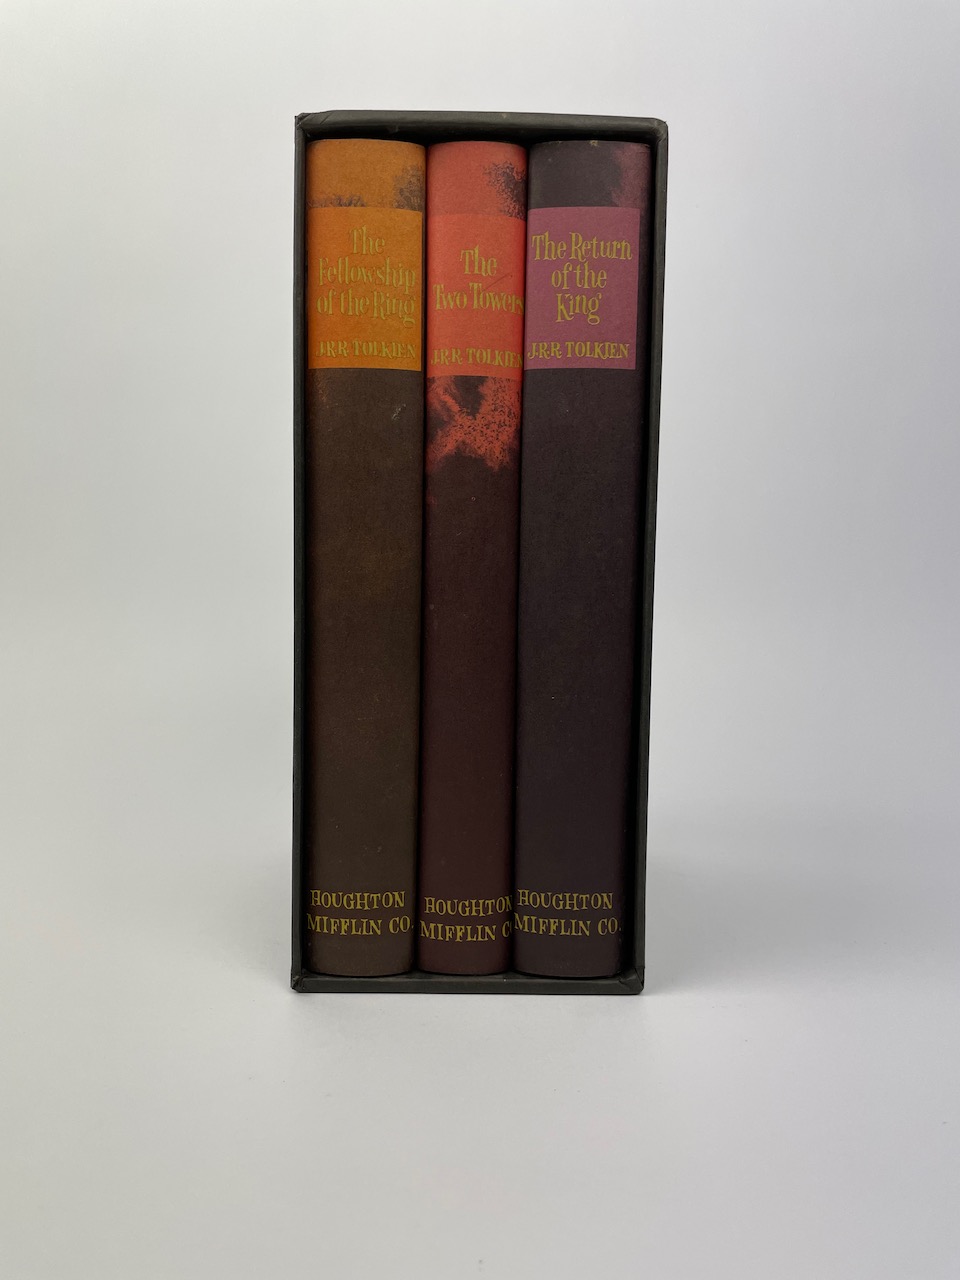 Lord of the Rings, 2nd US Edition in Original Publishers Slipcase and with Dustjackets 2